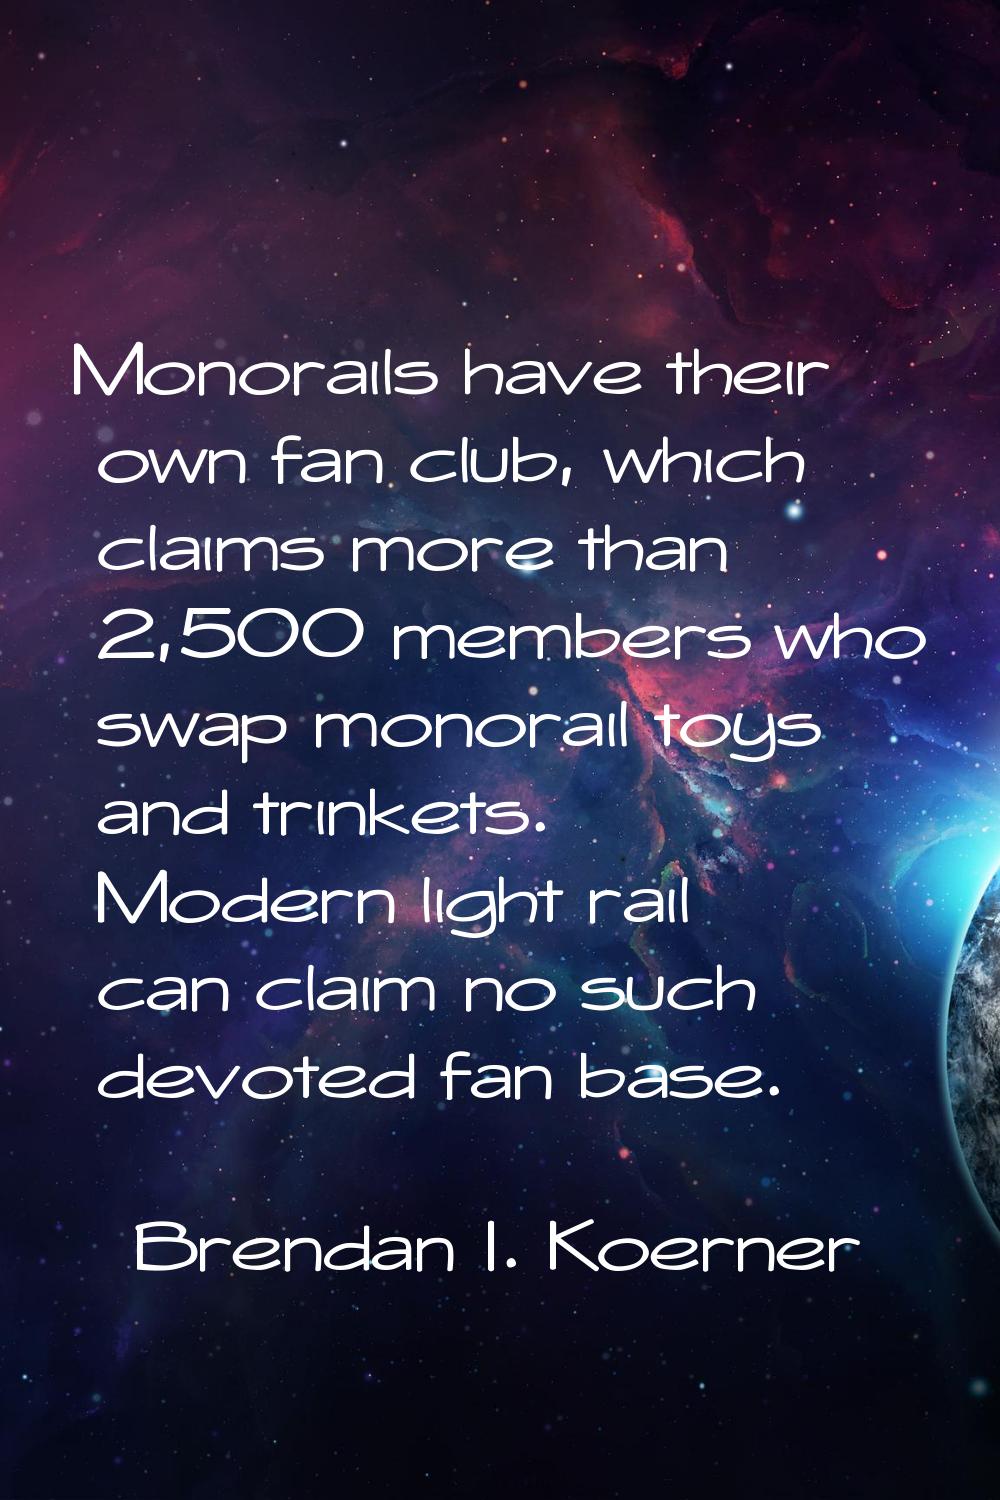 Monorails have their own fan club, which claims more than 2,500 members who swap monorail toys and 